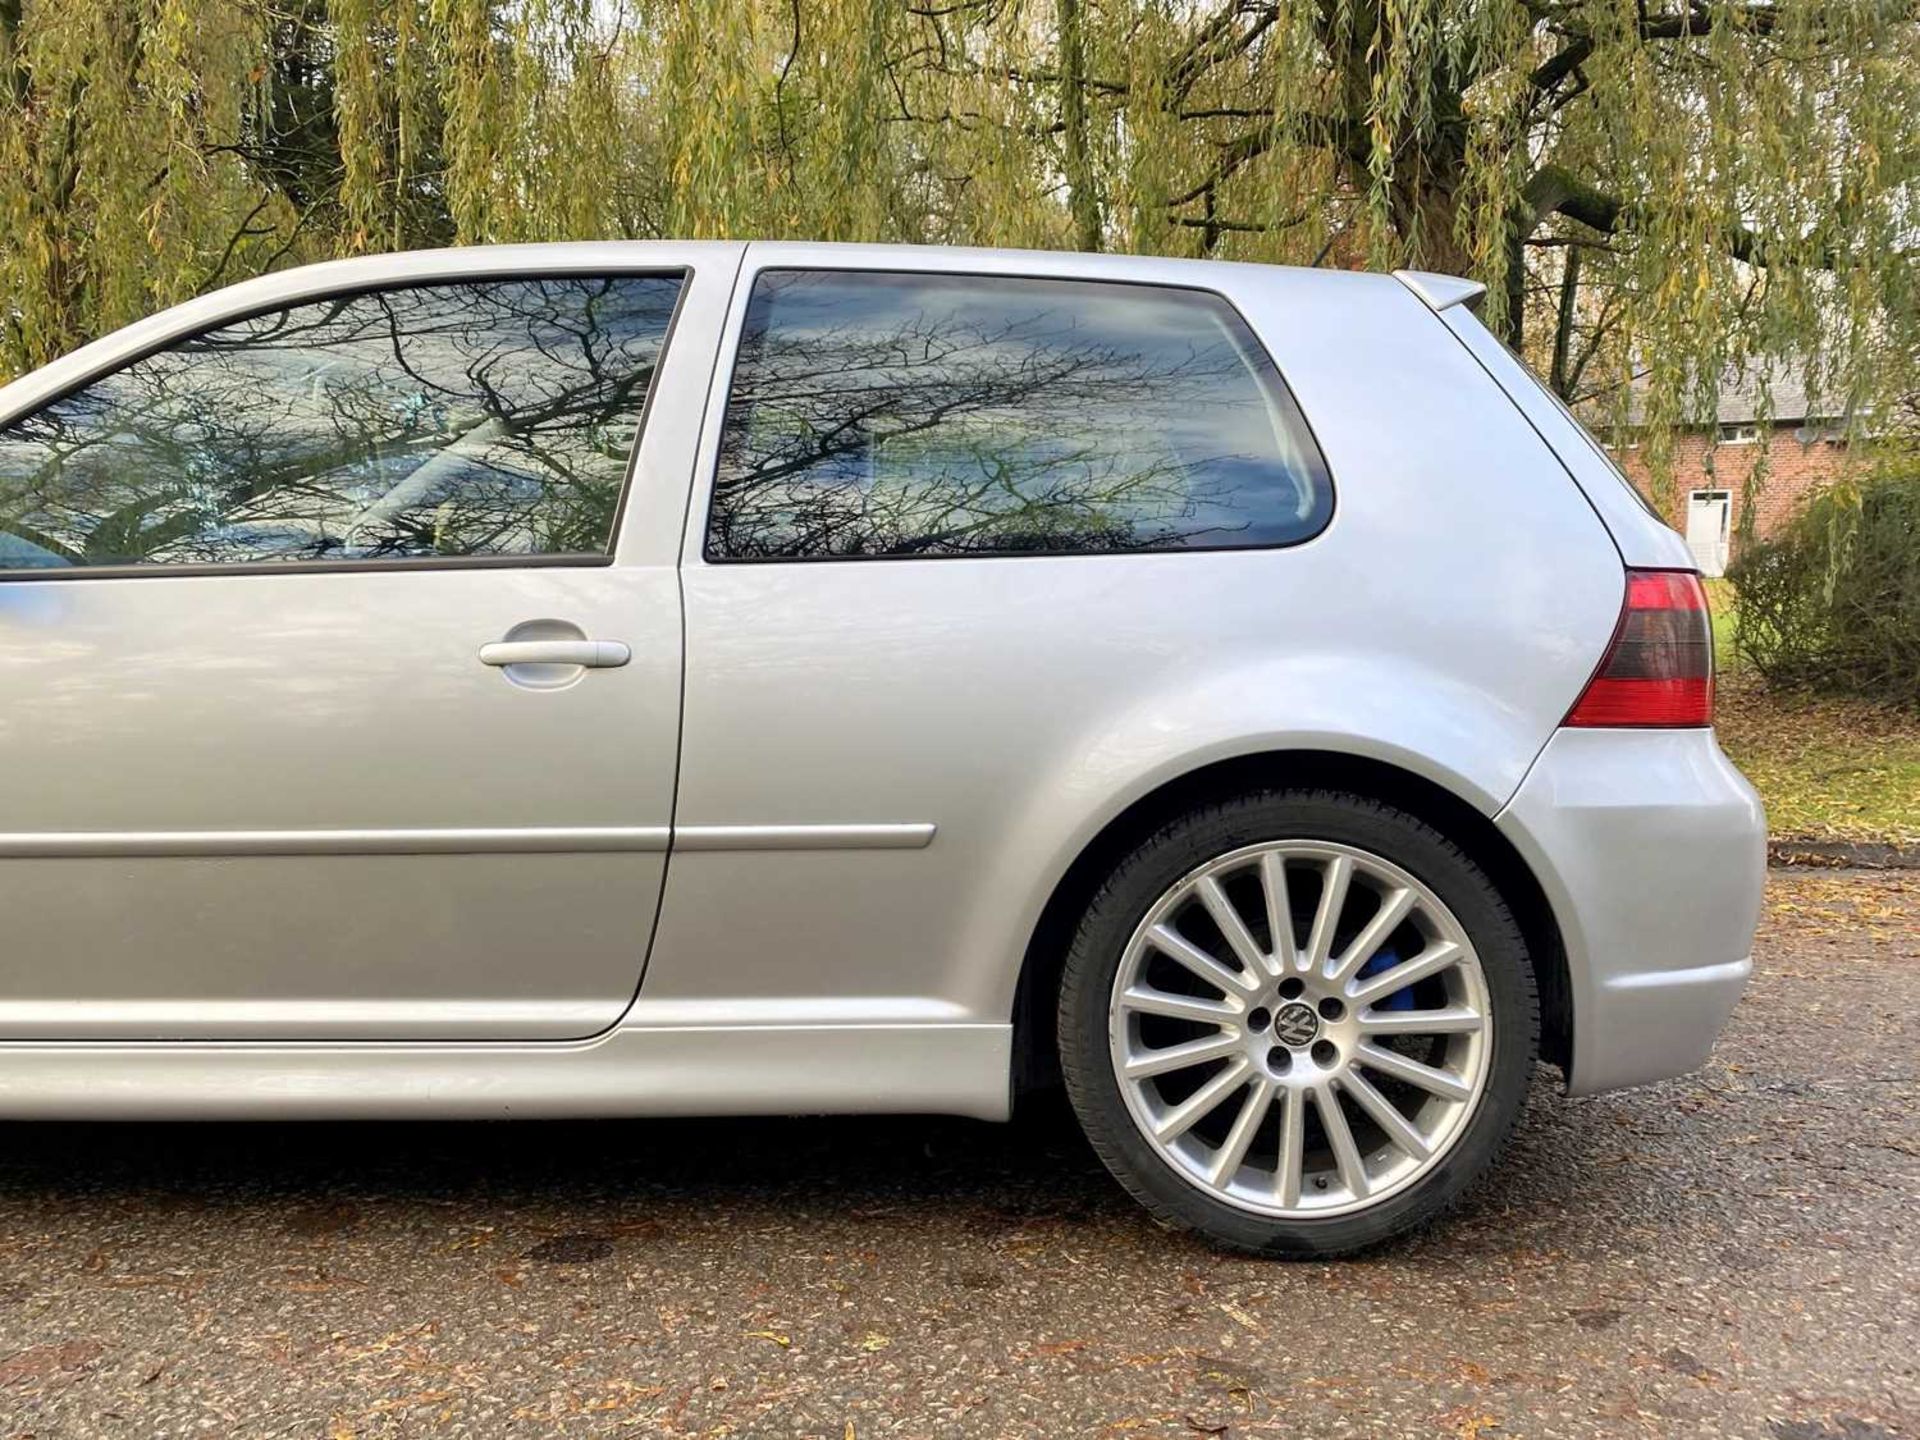 2003 Volkswagen Golf R32 In current ownership for sixteen years - Image 68 of 94